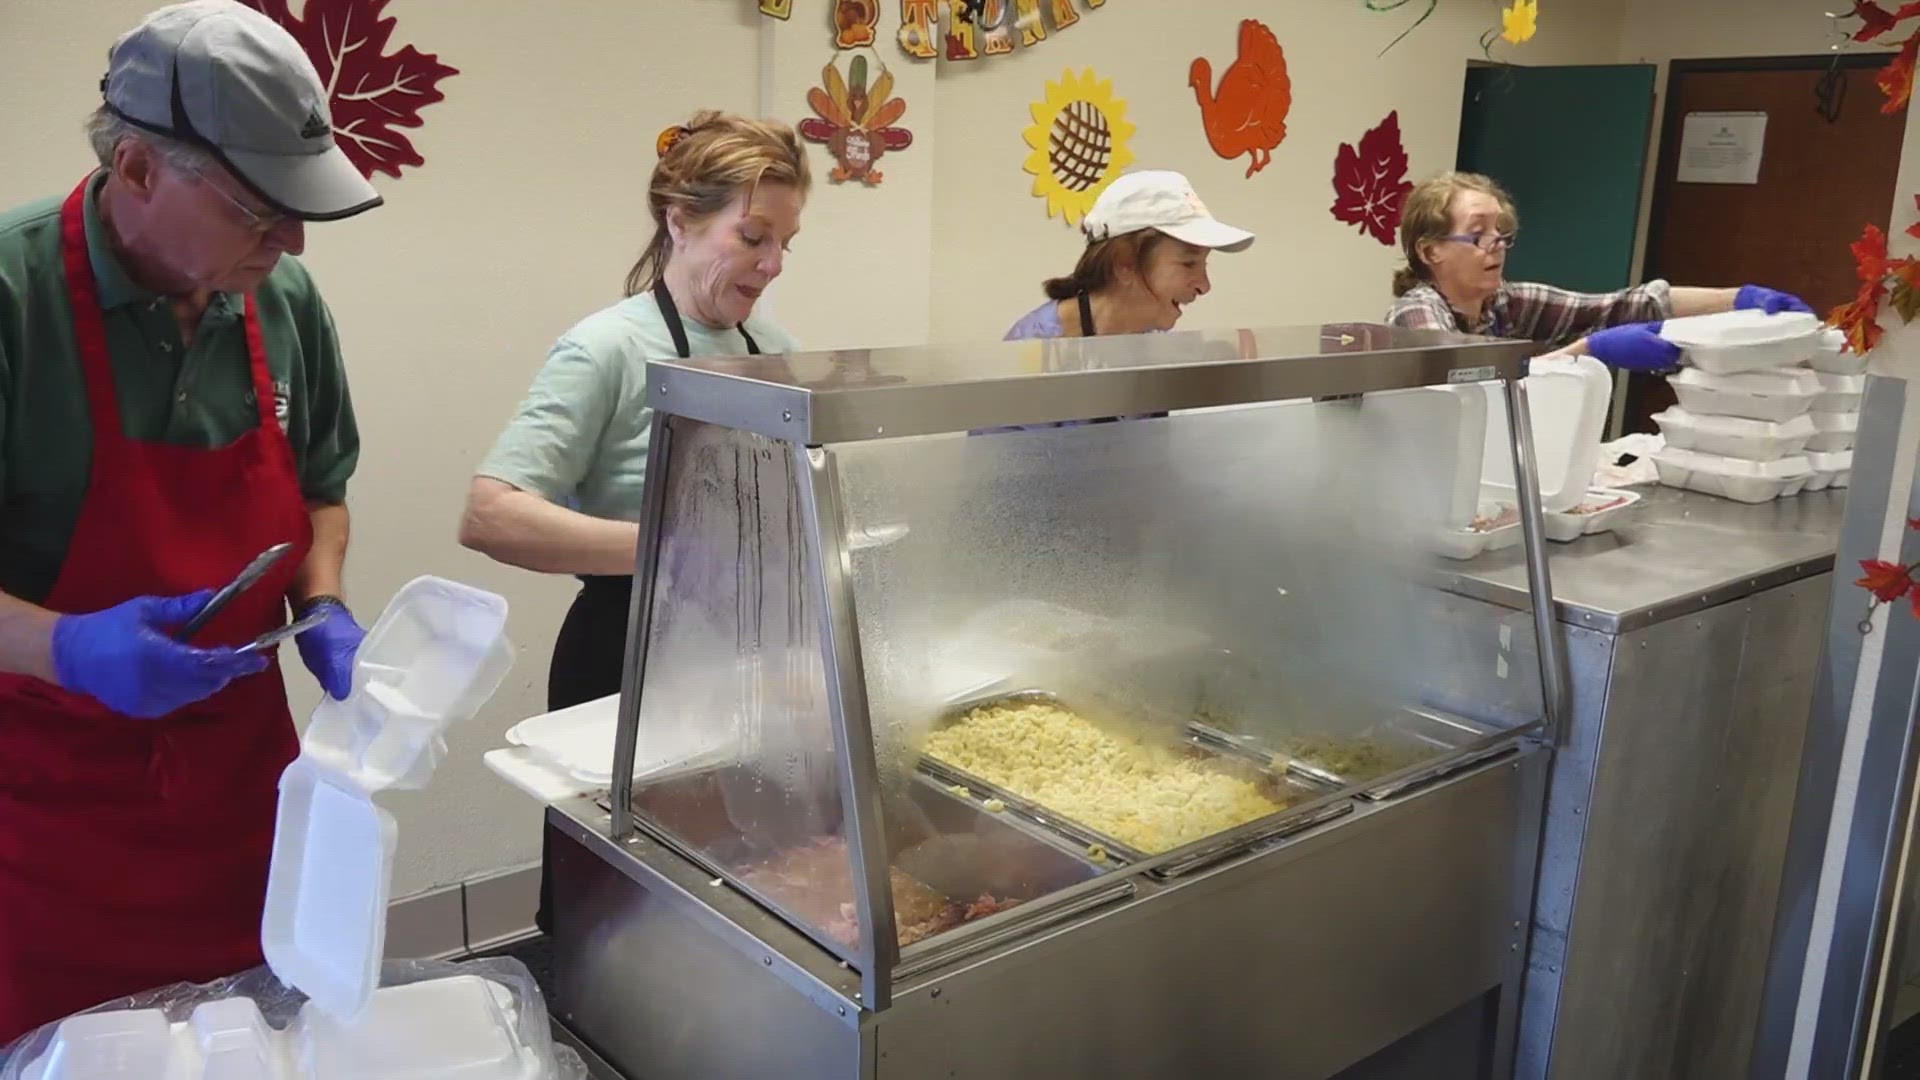 Loaves and Fishes calls on the community to help with the annual Thanksgiving meal